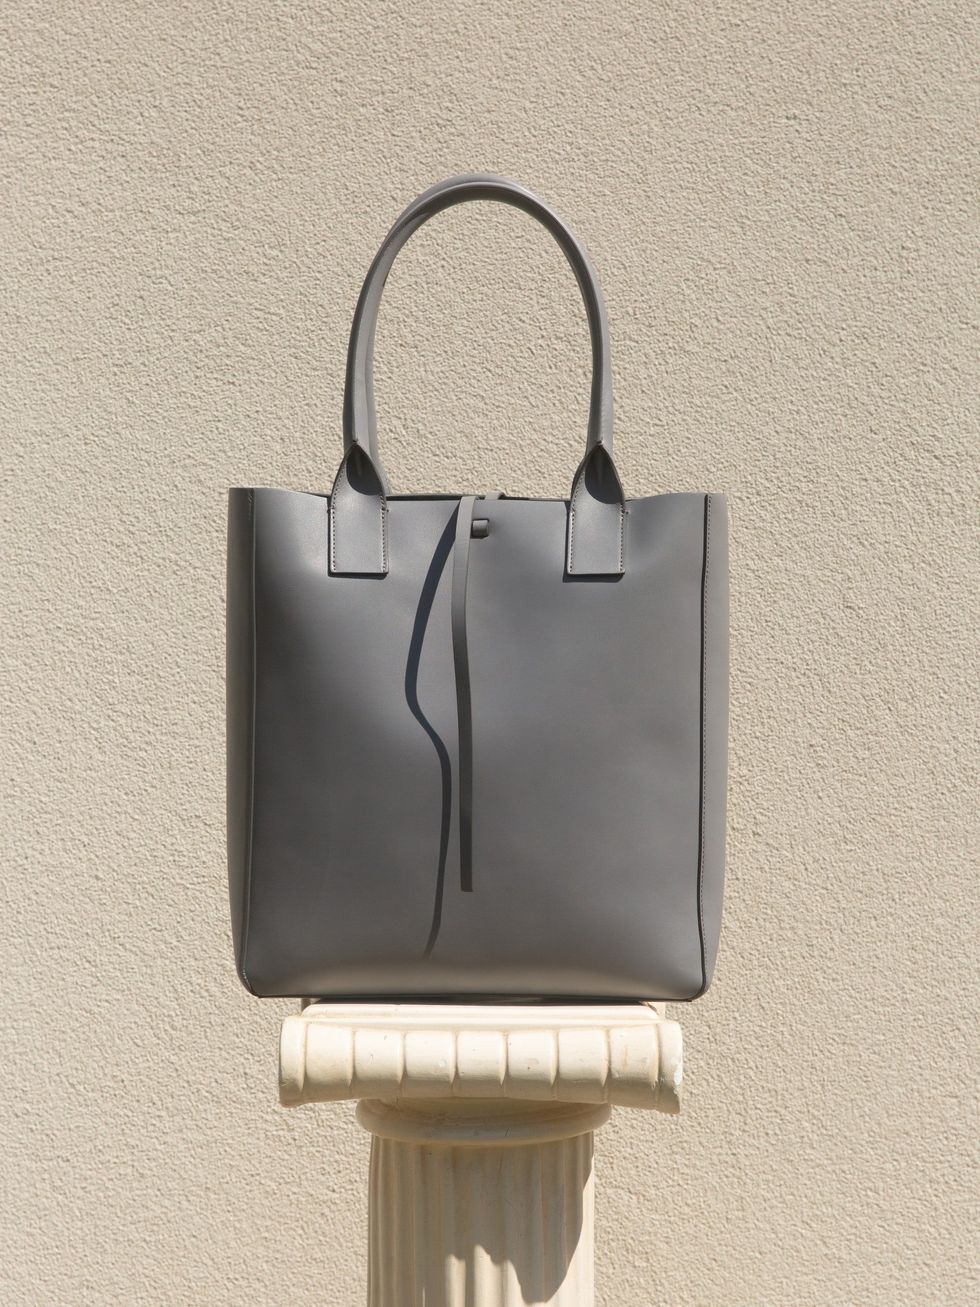 The best monogram leather totes are all under $200